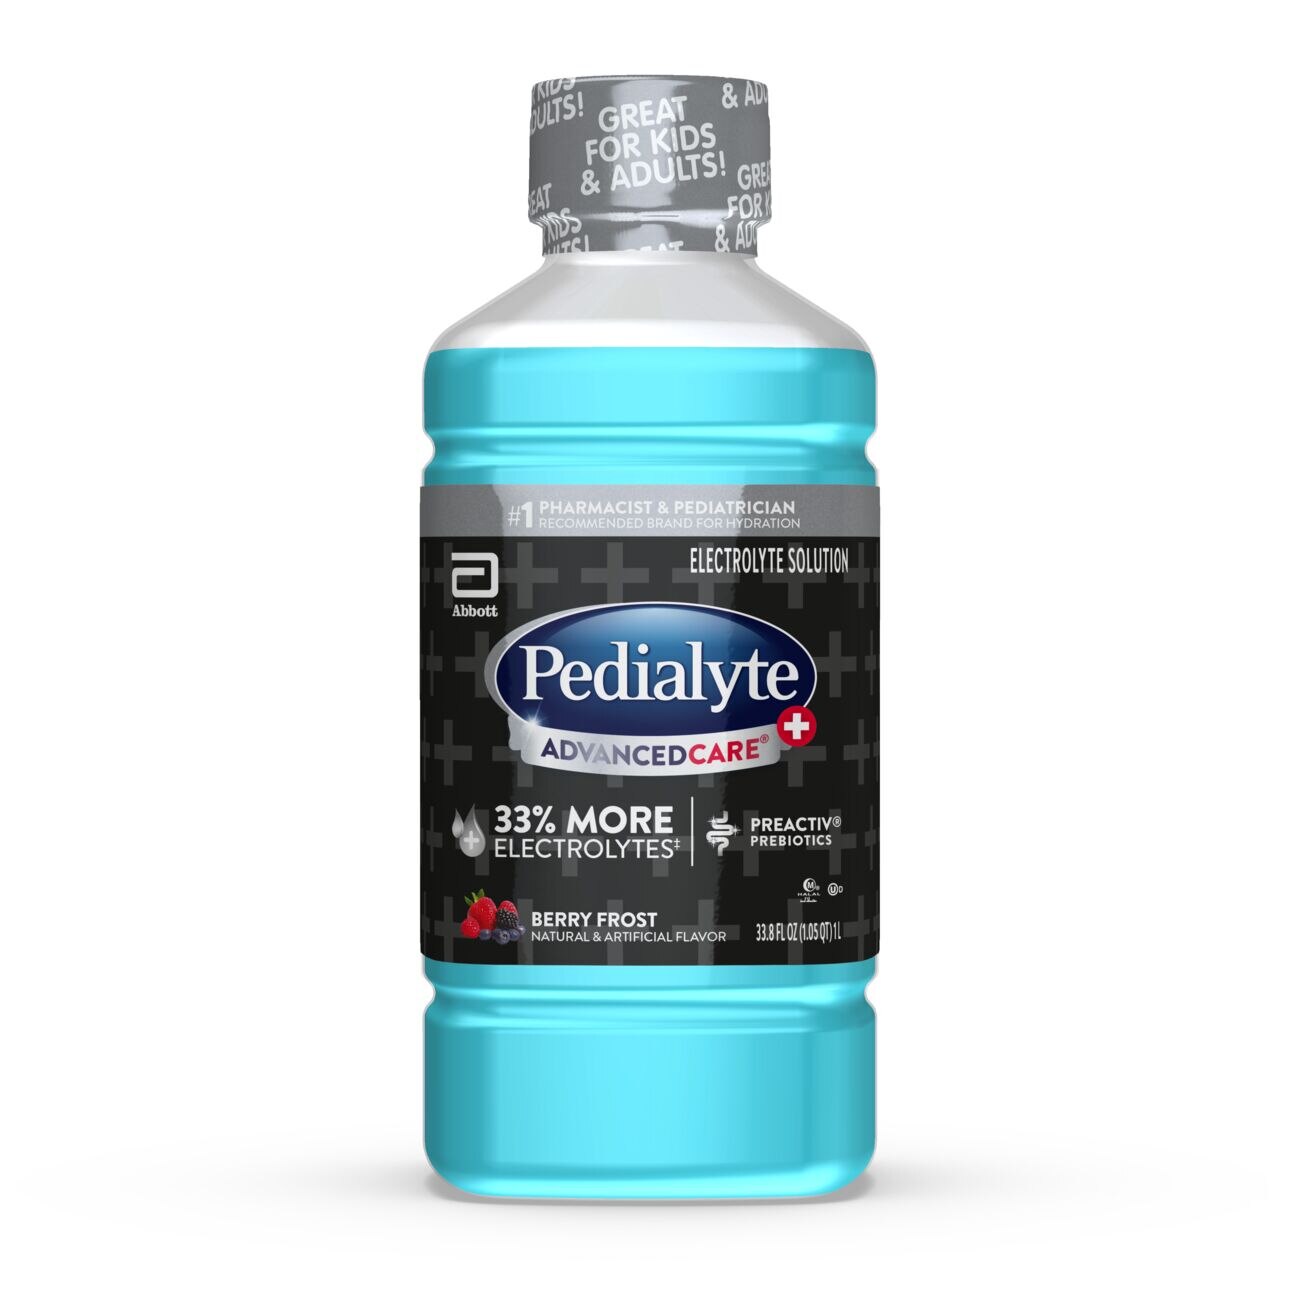 Pedialyte AdvancedCare Plus Electrolyte Solution Ready-to-Drink 1.1 qt, 1CT